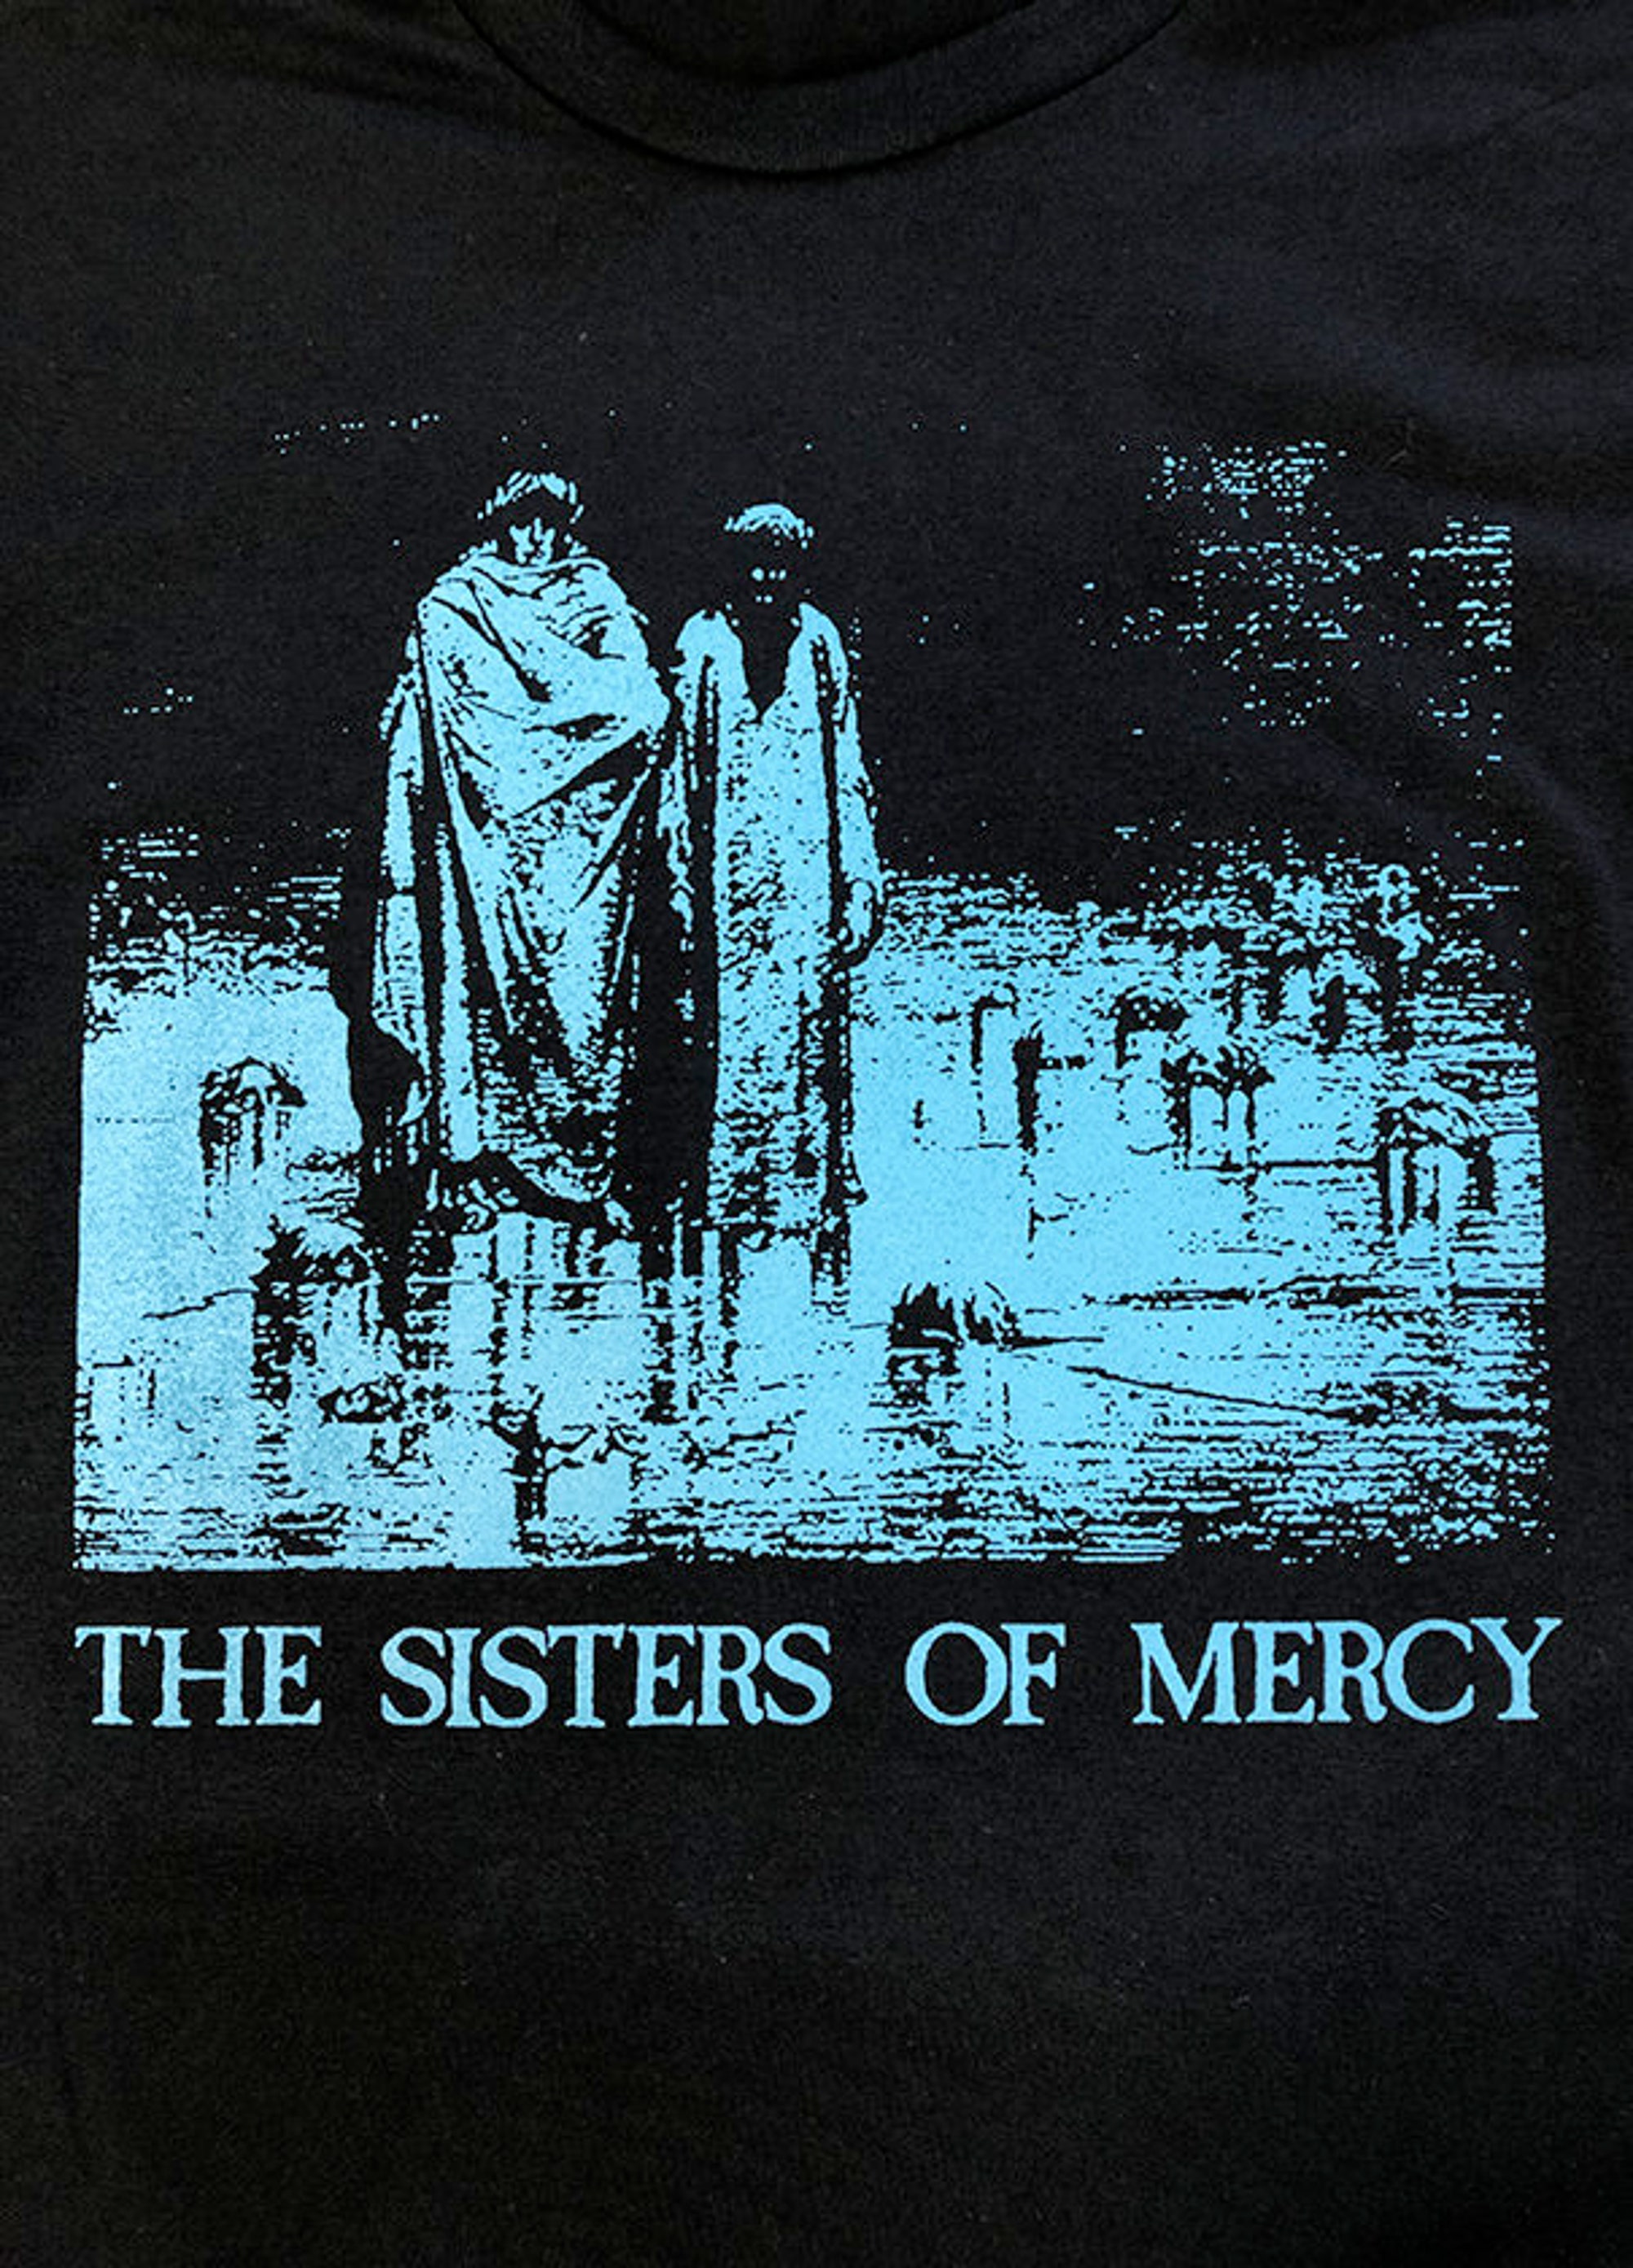 Discover SISTERS OF MERCY - Body and Soul Shirt